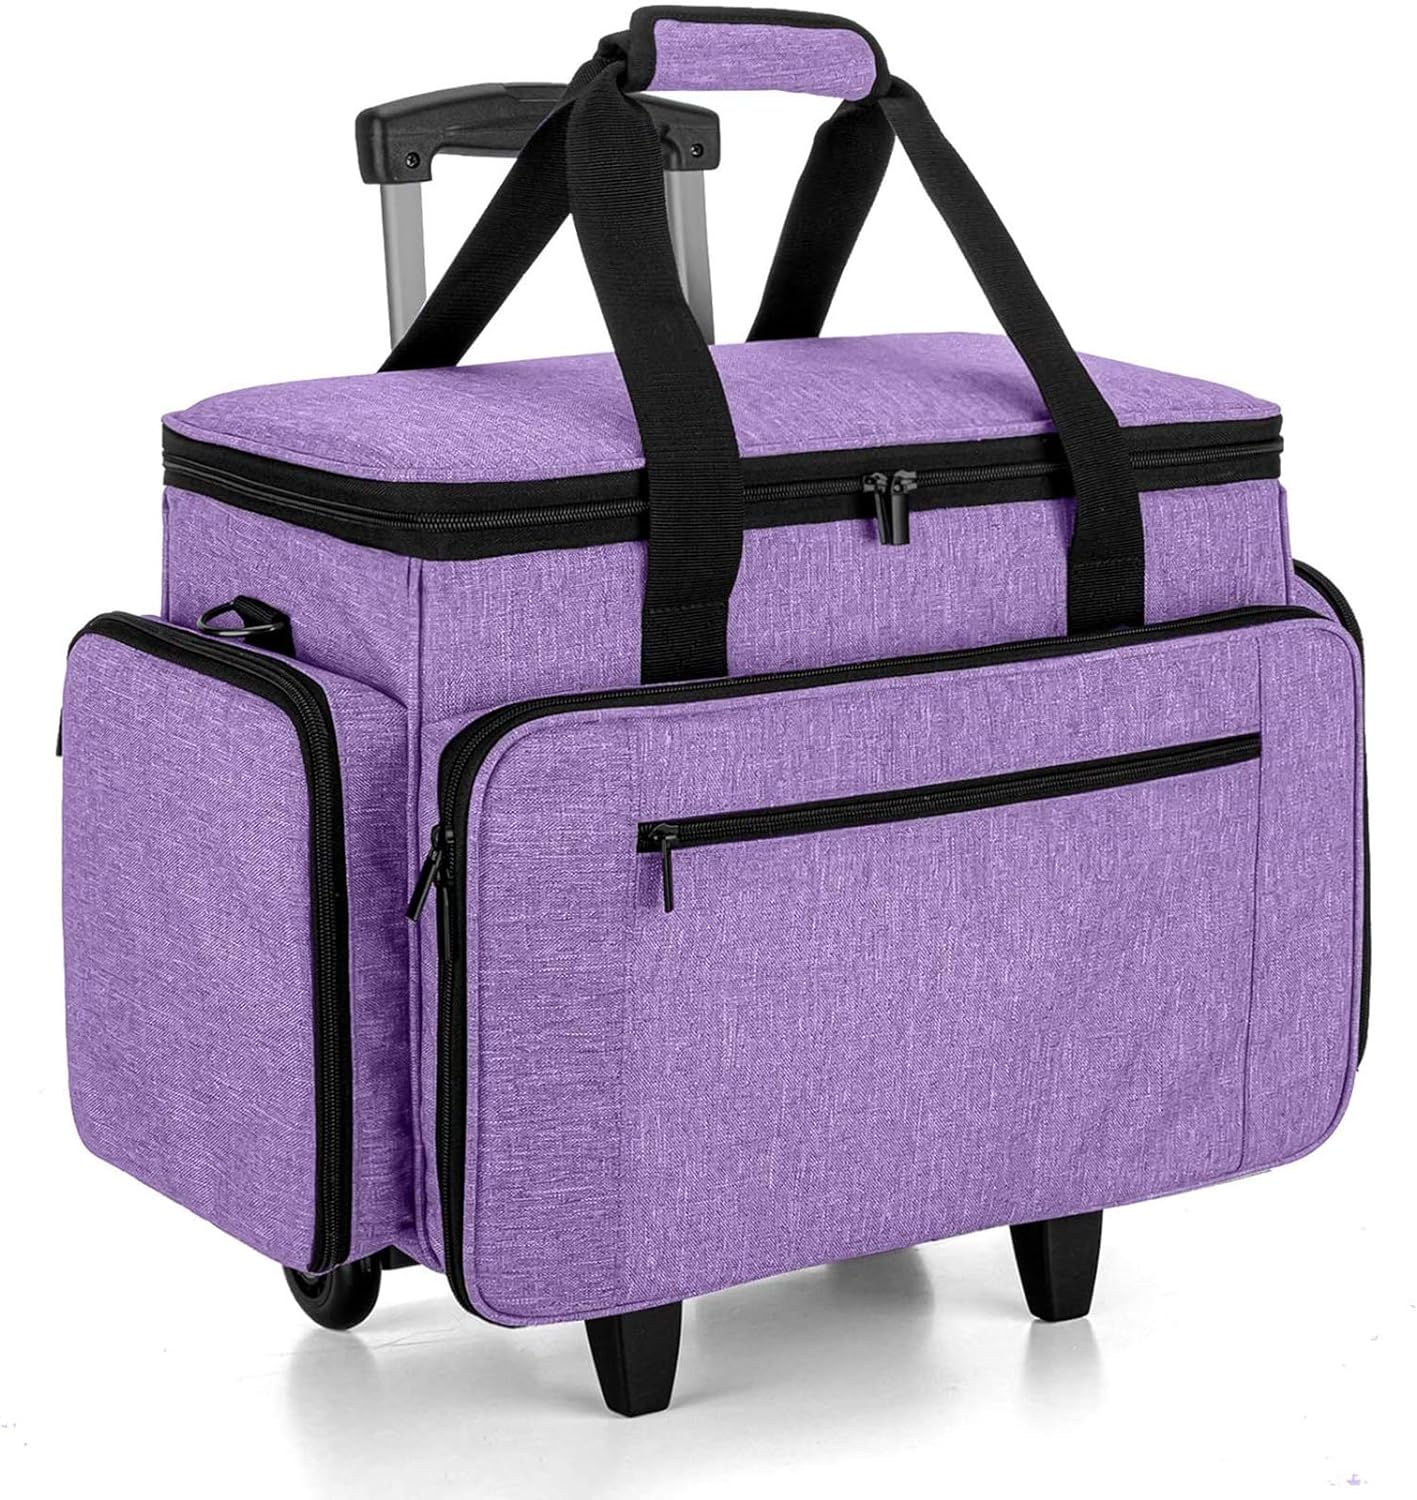 LUXJA Sewing Machine Case with Detachable Dolly, Rolling Sewing Machine Tote with Removable Bottom Pad (Fits for Most Standard Sewing Machines), Purple (Patented Design)